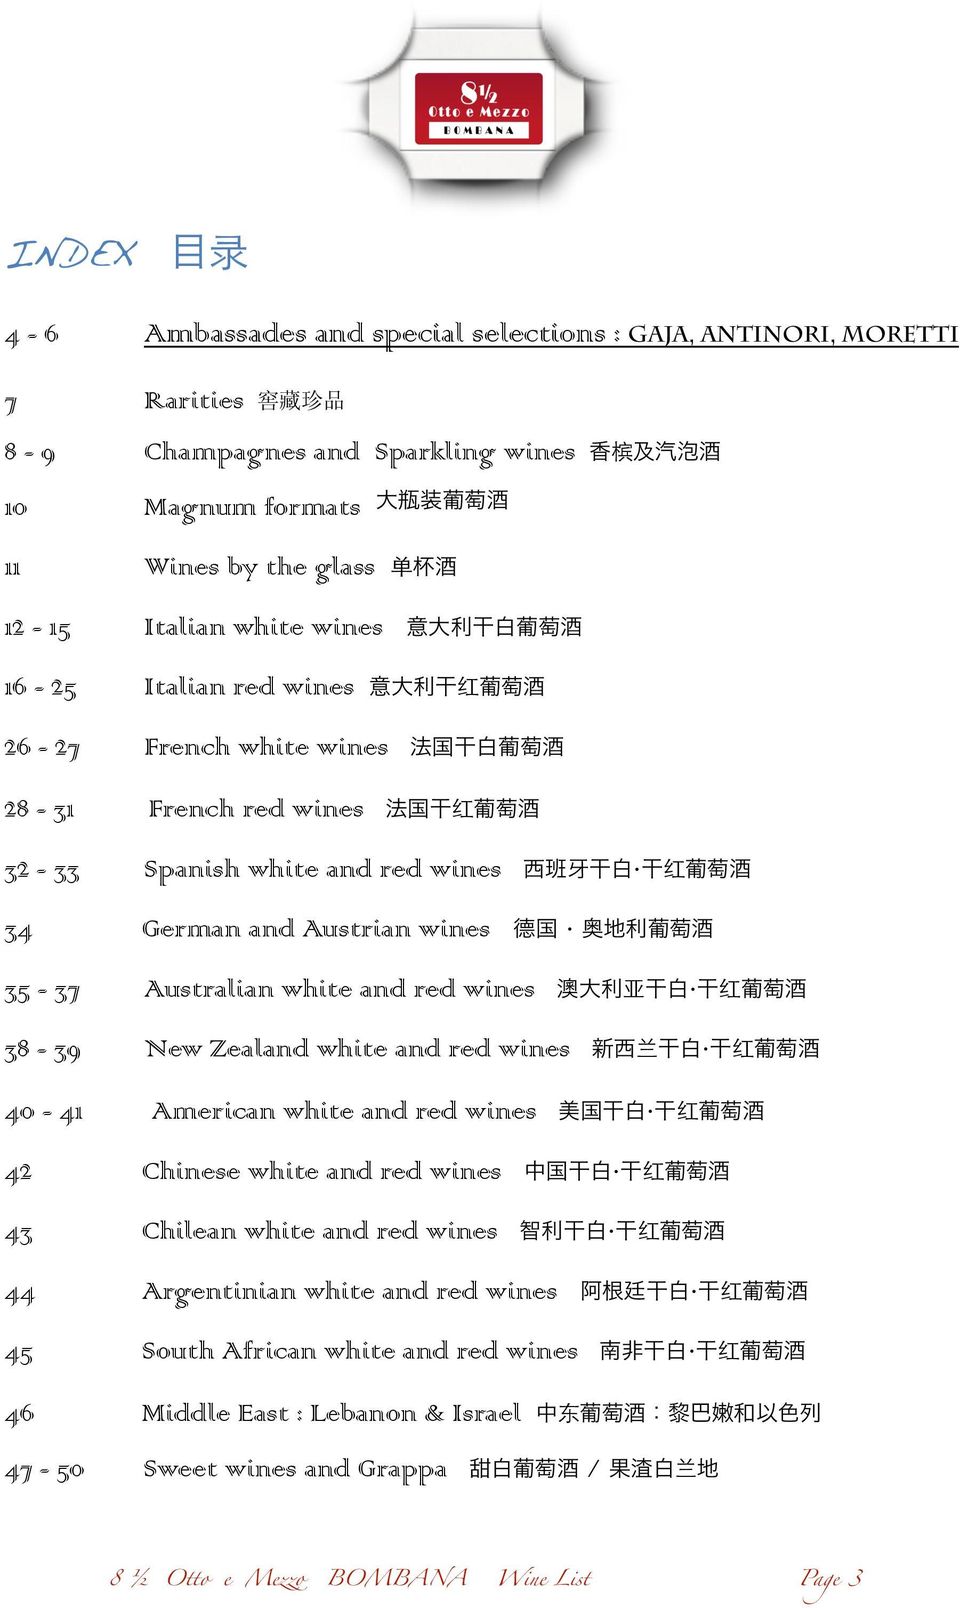 white and red wines 亚 红 38-39 New Zealand white and red wines 兰 红 40-41 American white and red wines 红 42 Chinese white and red wines 红 43 Chilean white and red wines 红 44